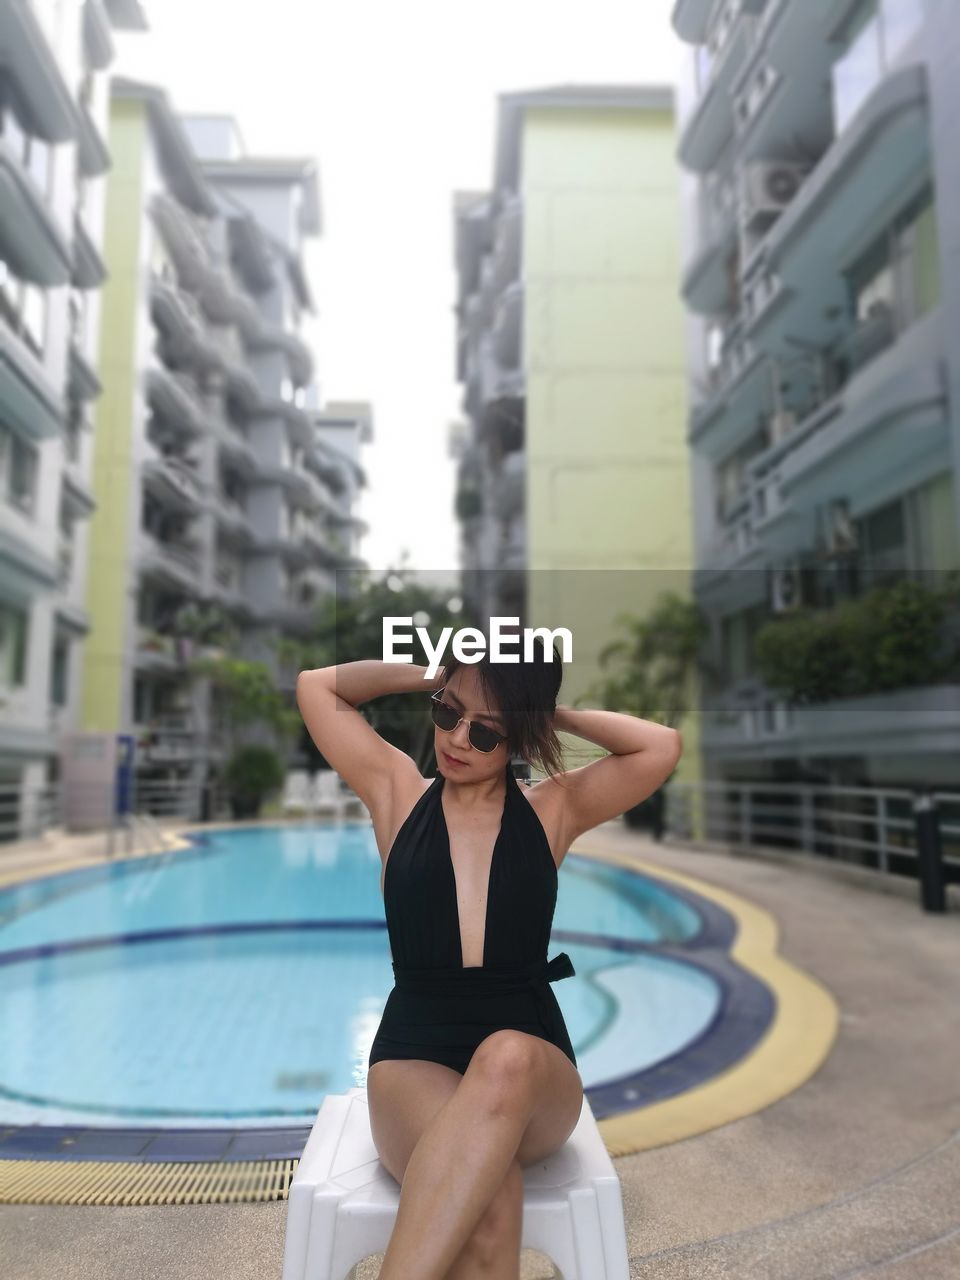 Woman in swimwear sitting on stool by swimming pool amidst buildings